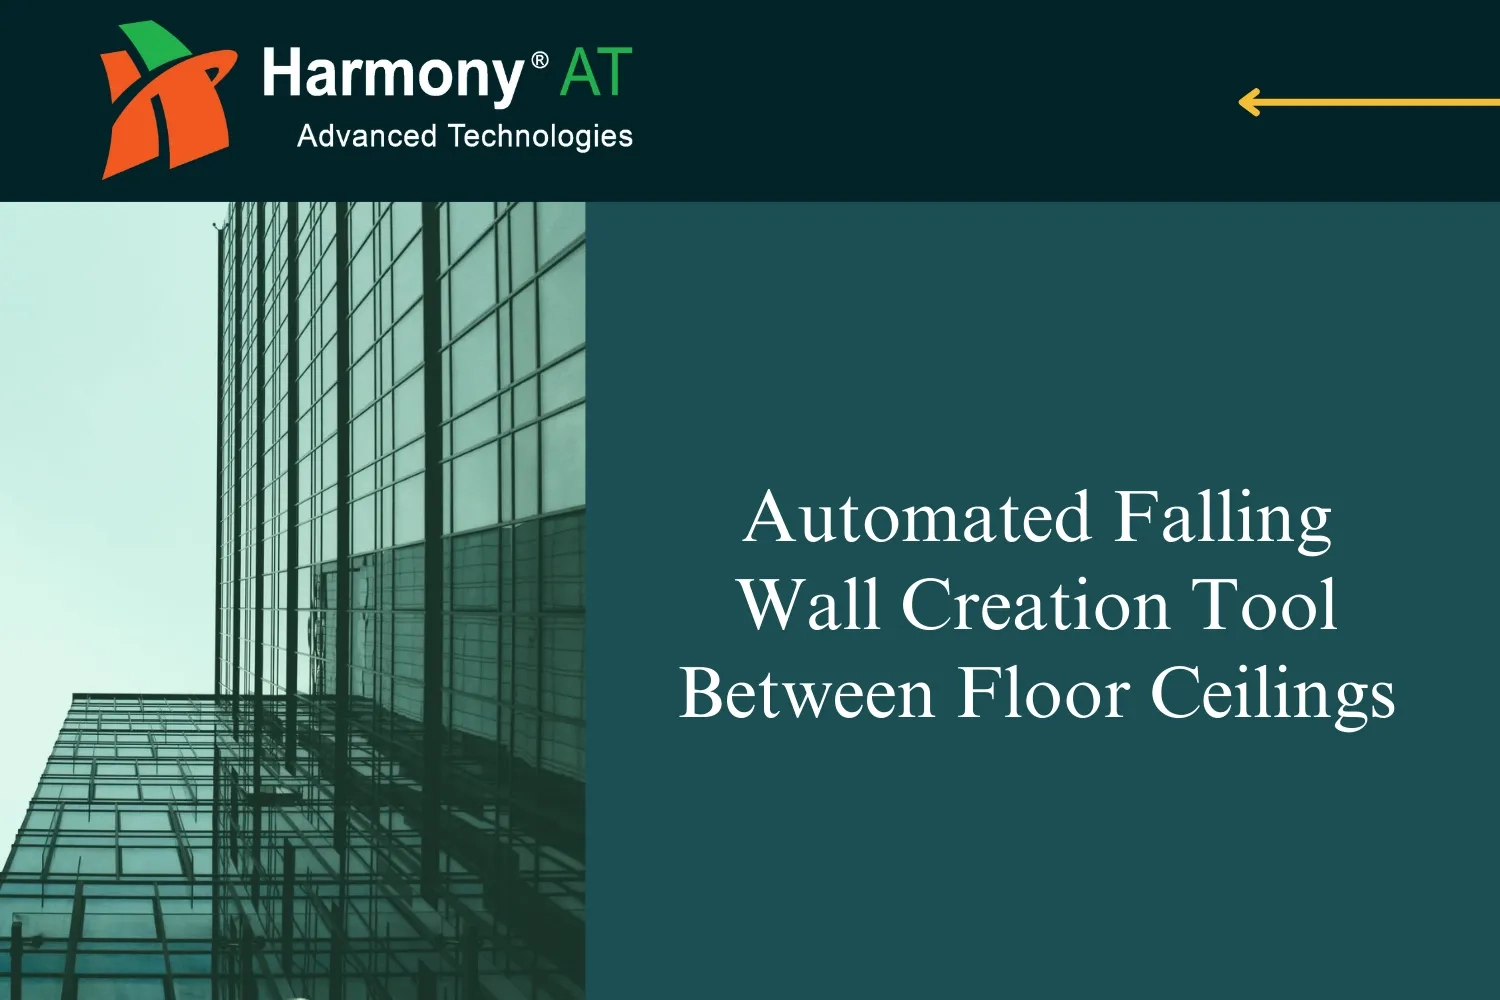 Automated Falling Wall Creation Tool